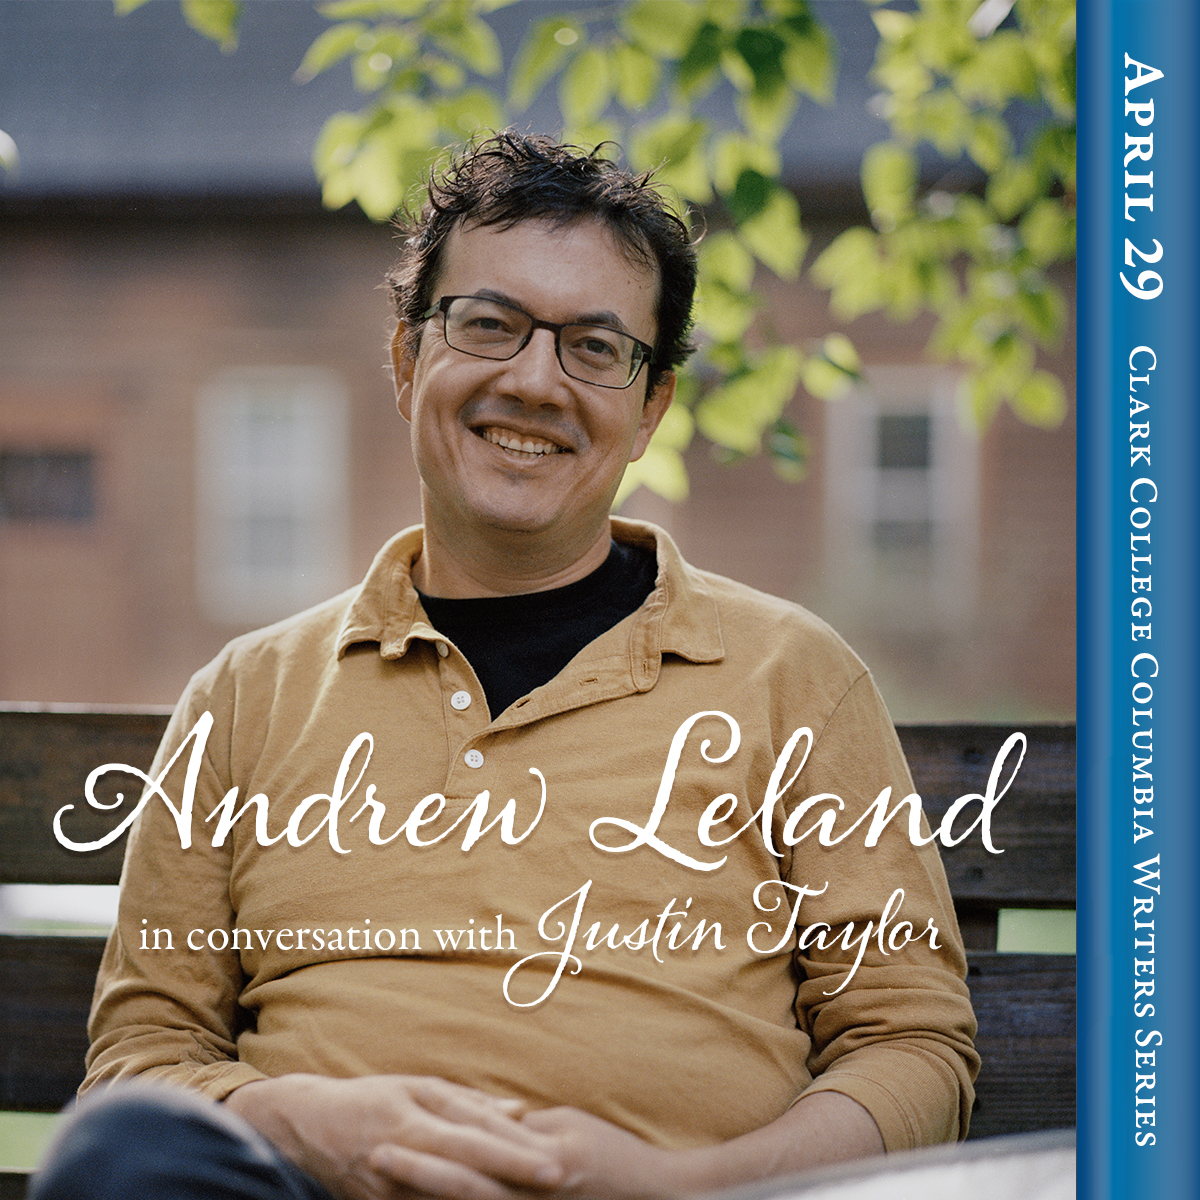 📖 Join us April 29th at 11 a.m. in PUB 258 A-B for an event with Andrew Leland in conversation with Justin Taylor. Free and open to the public.